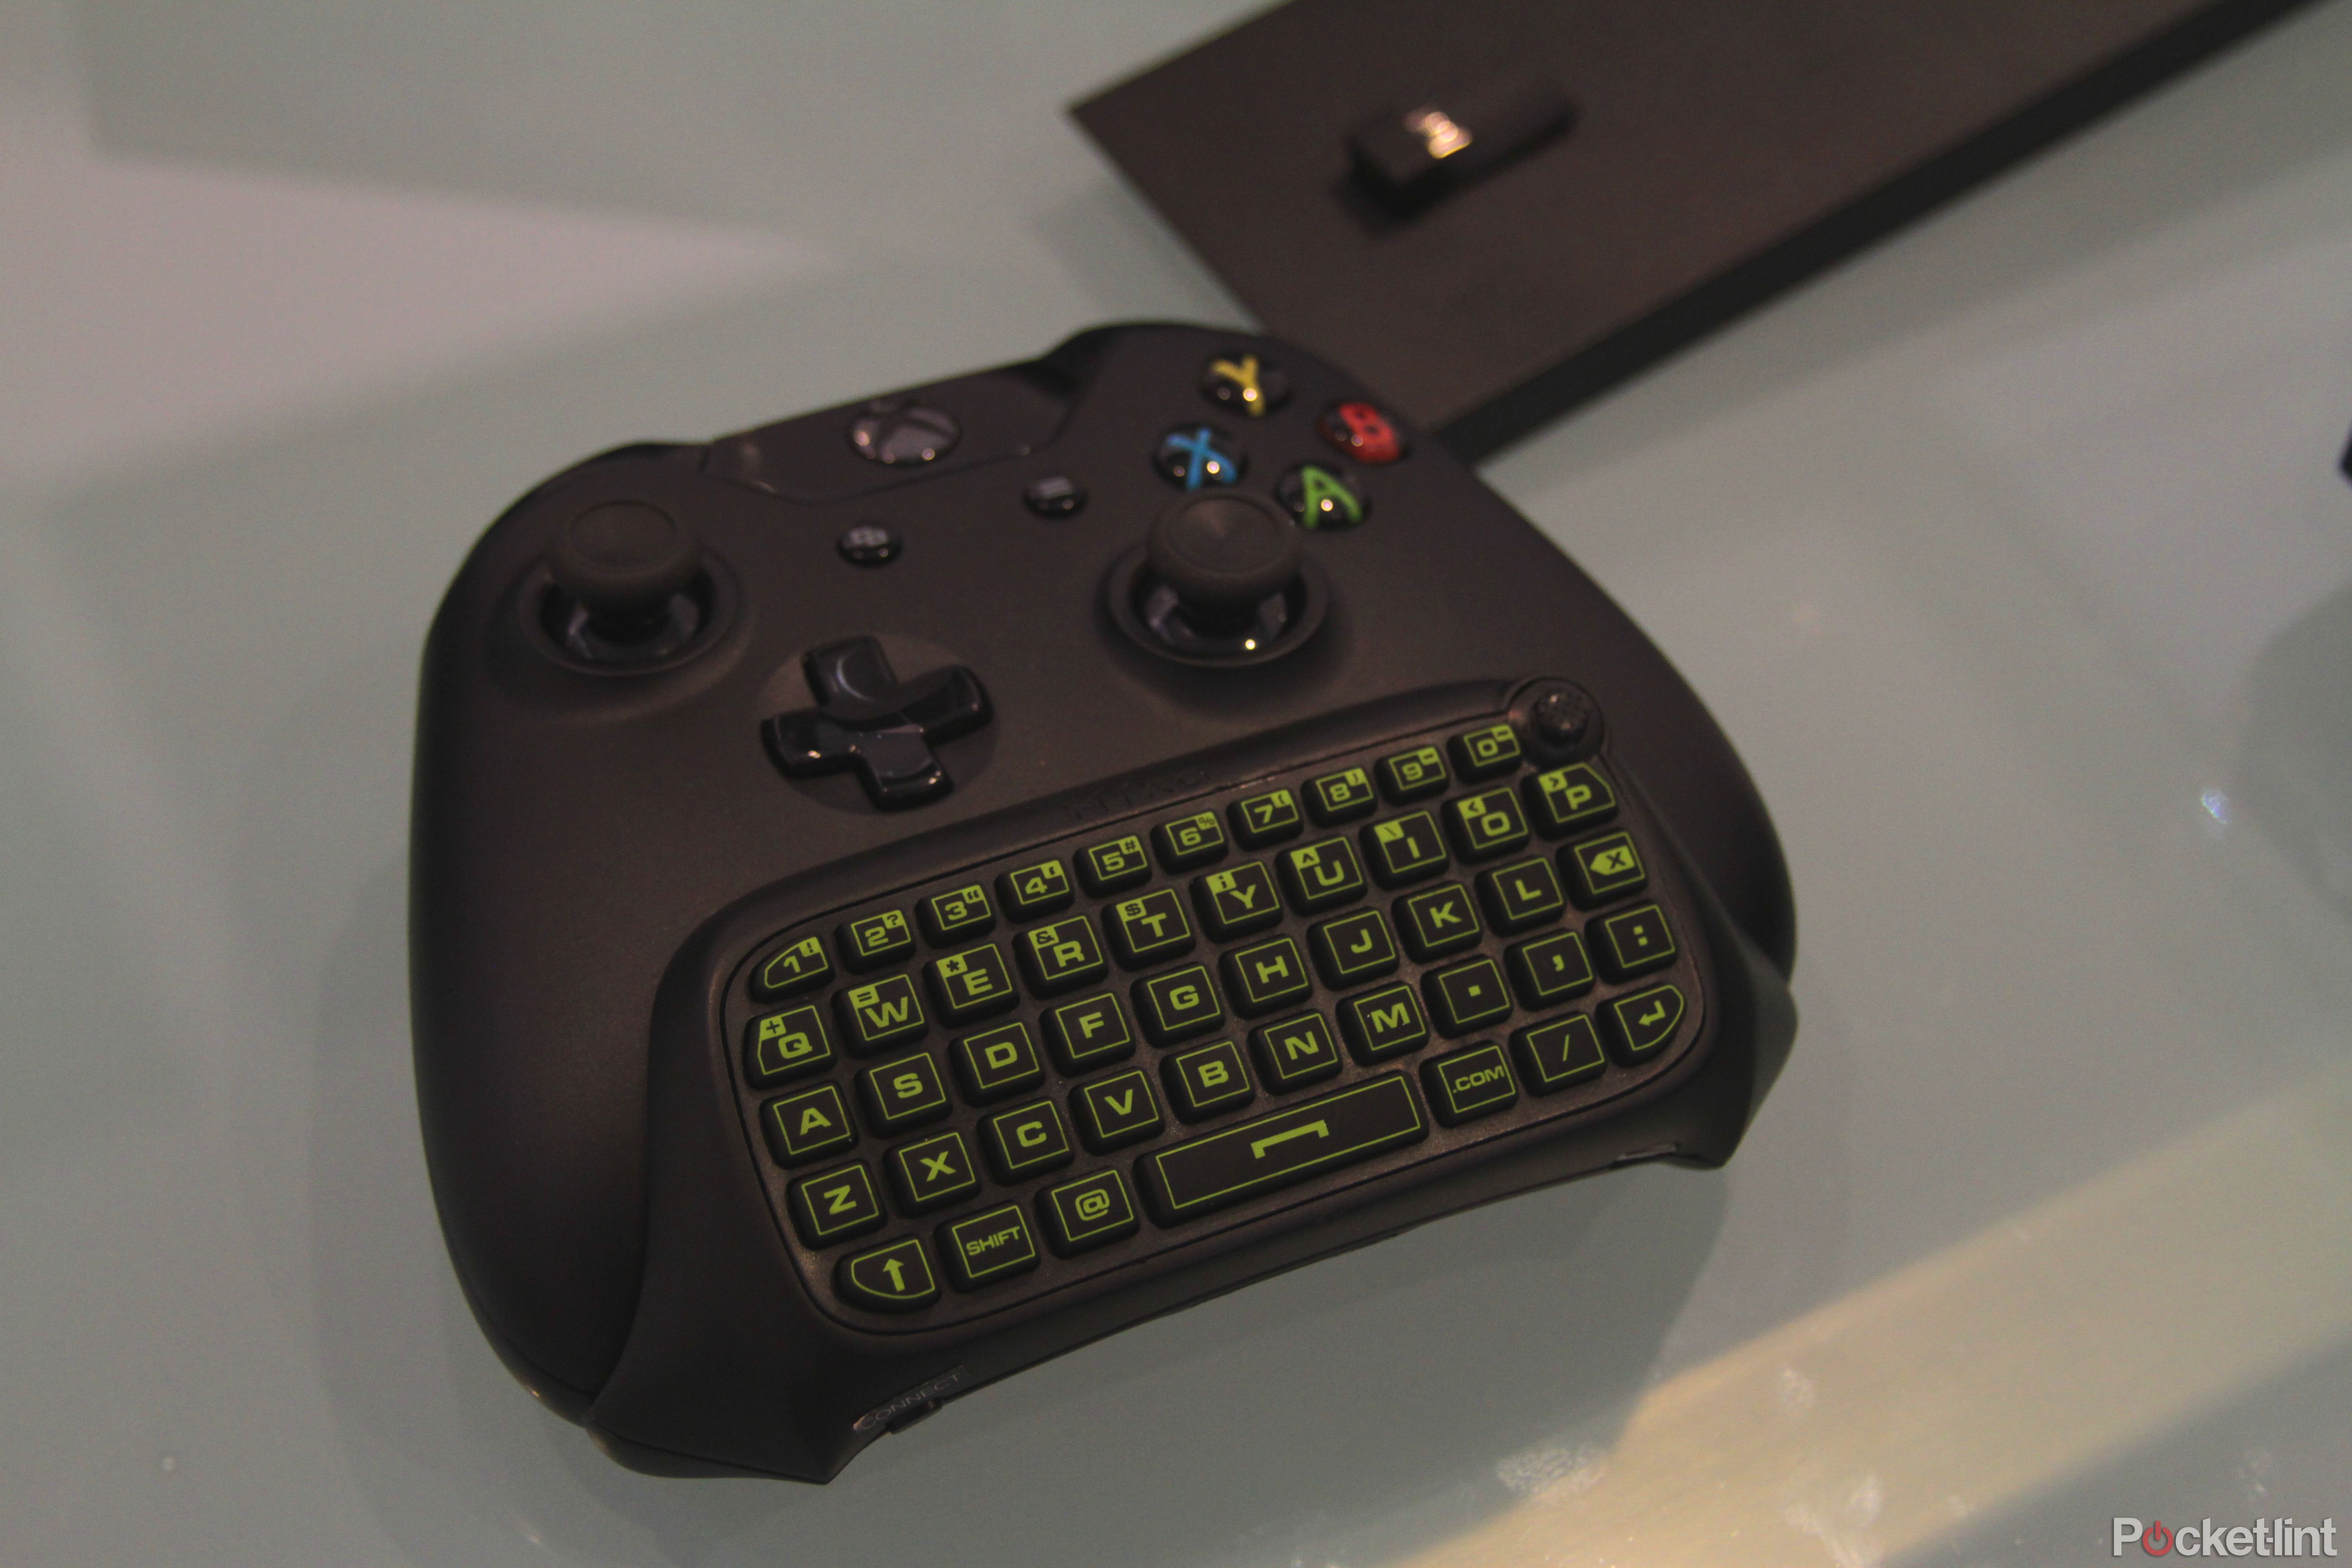 nyko has xbox one gamers covered with its new data bank enclosure type pad keyboard and more hands on image 4